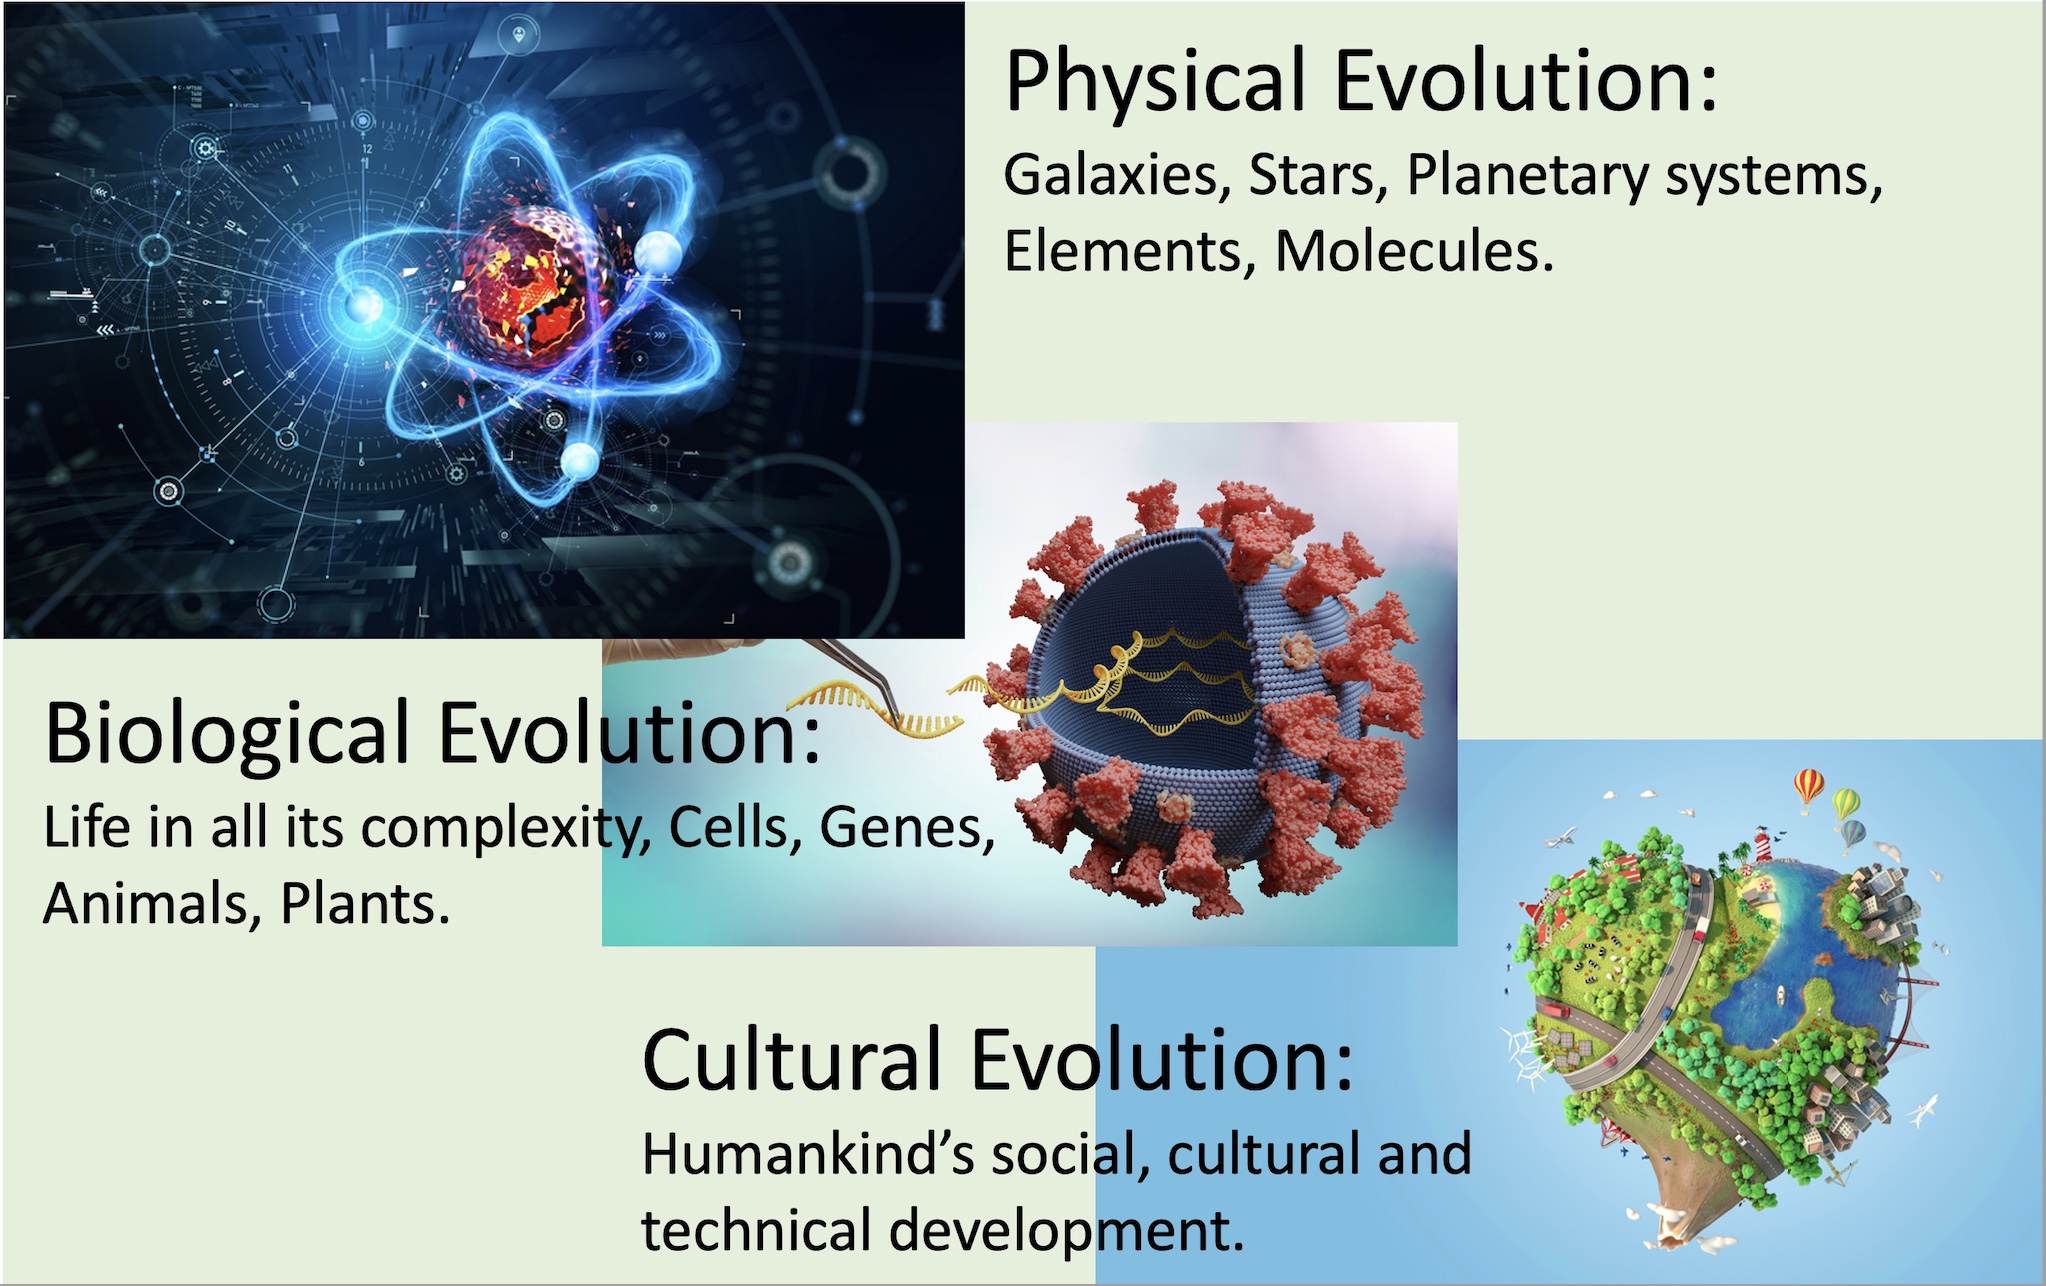 Diagram showing physical, biological and cultural evolution